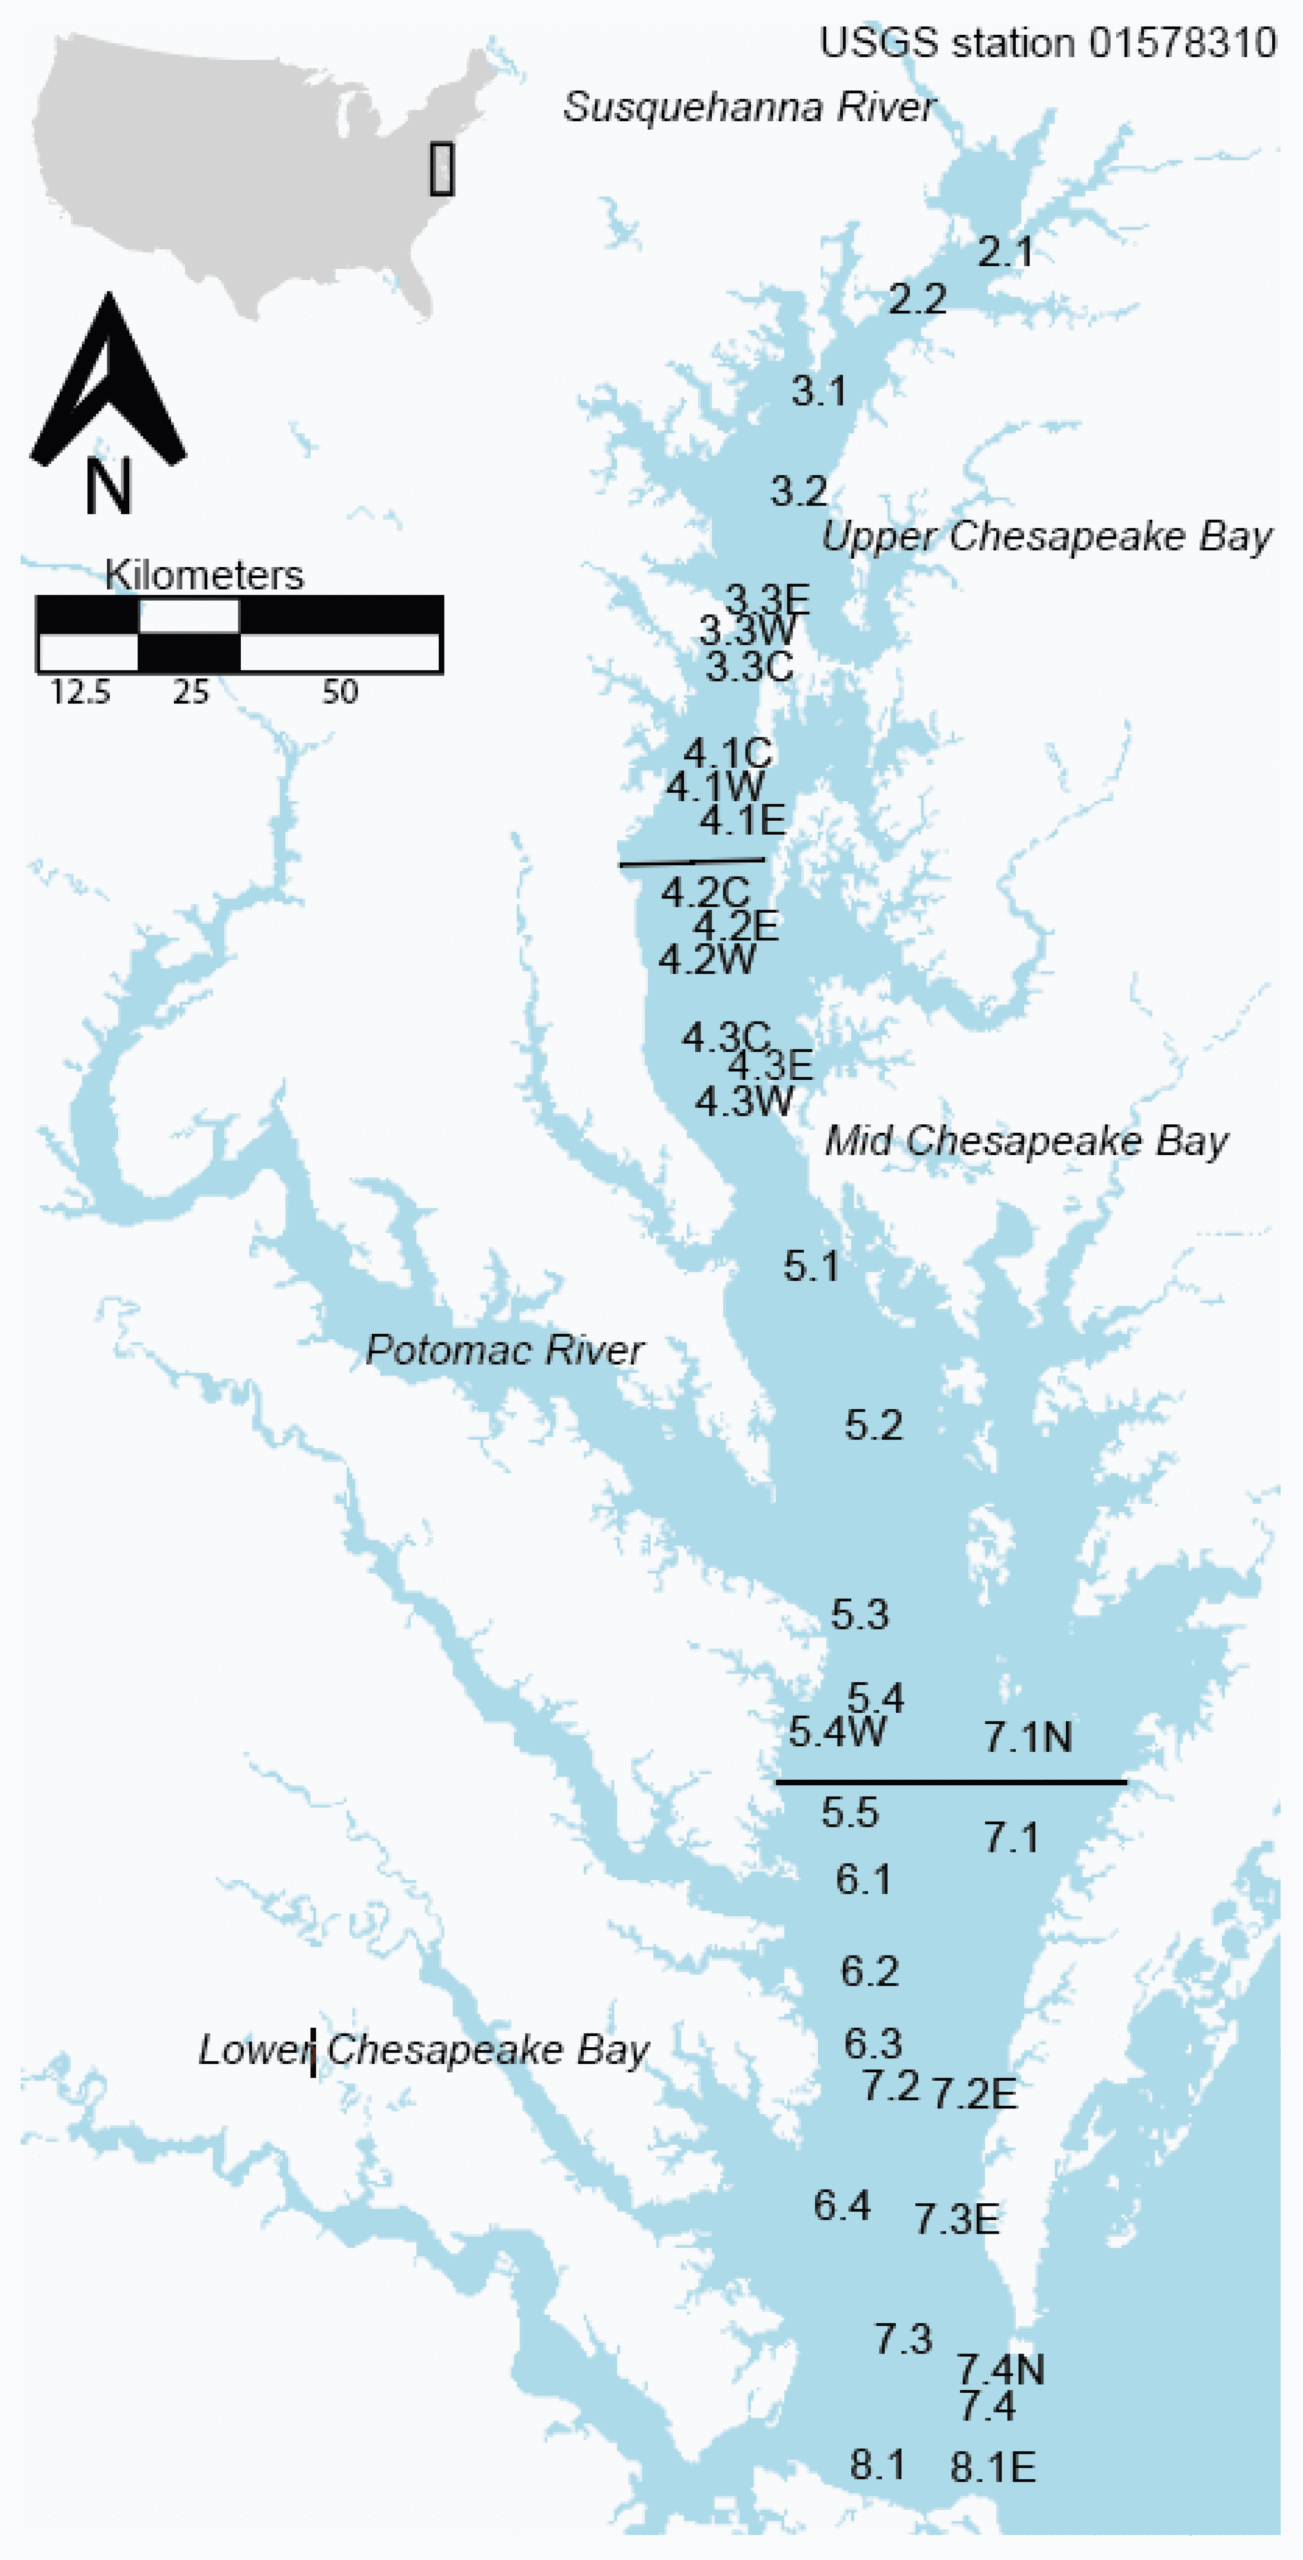 New Publication Evaluates Chlorophyll-a Algorithms in the Chesapeake Bay